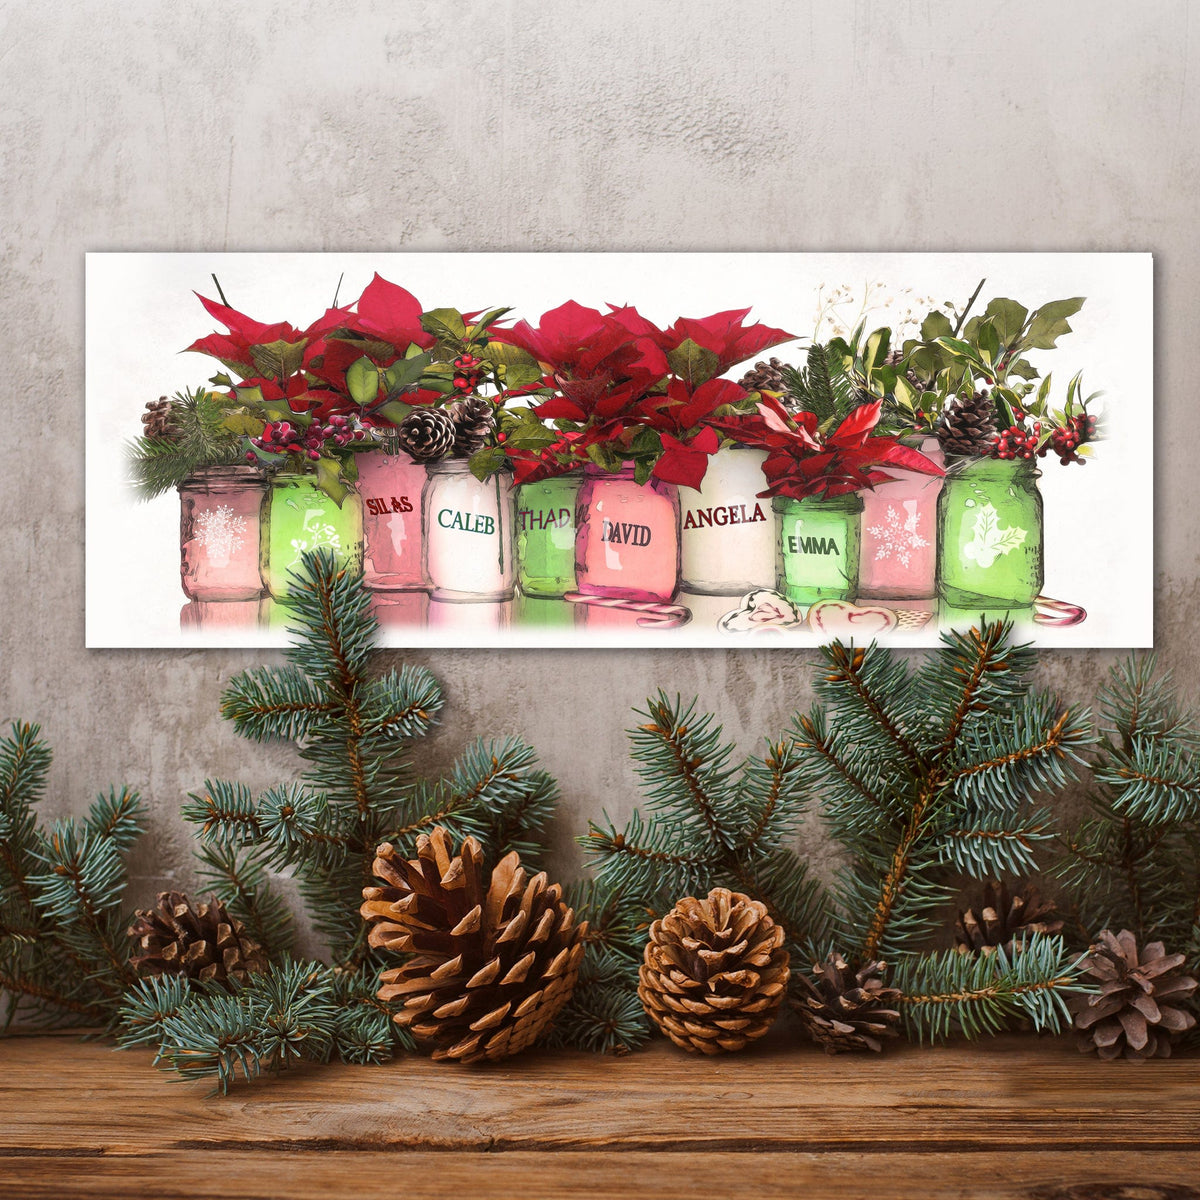 The perfect personalized Christmas Decor for your home. Makes a great personalized gift for grandparents. 